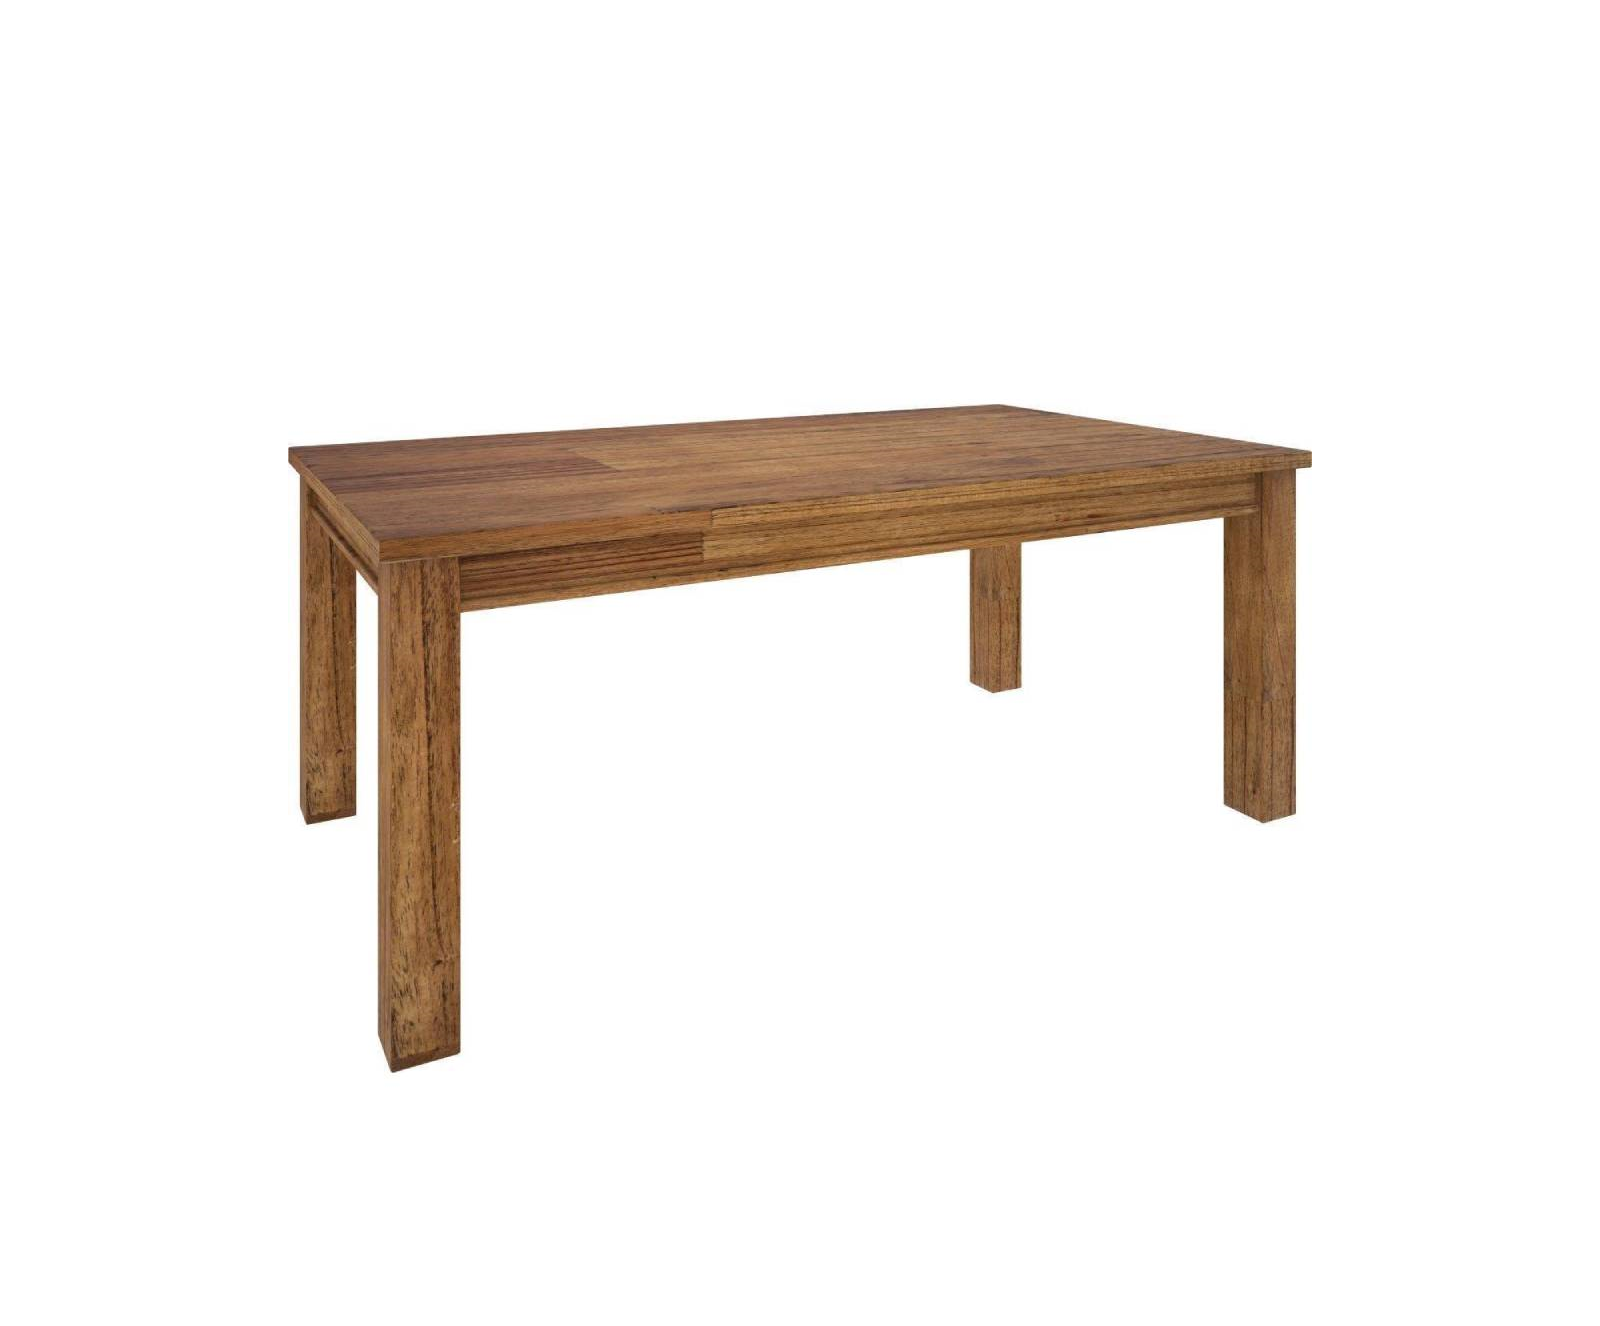 Rosalind Solid Mountain Ash Timber Dining Table, 190cm